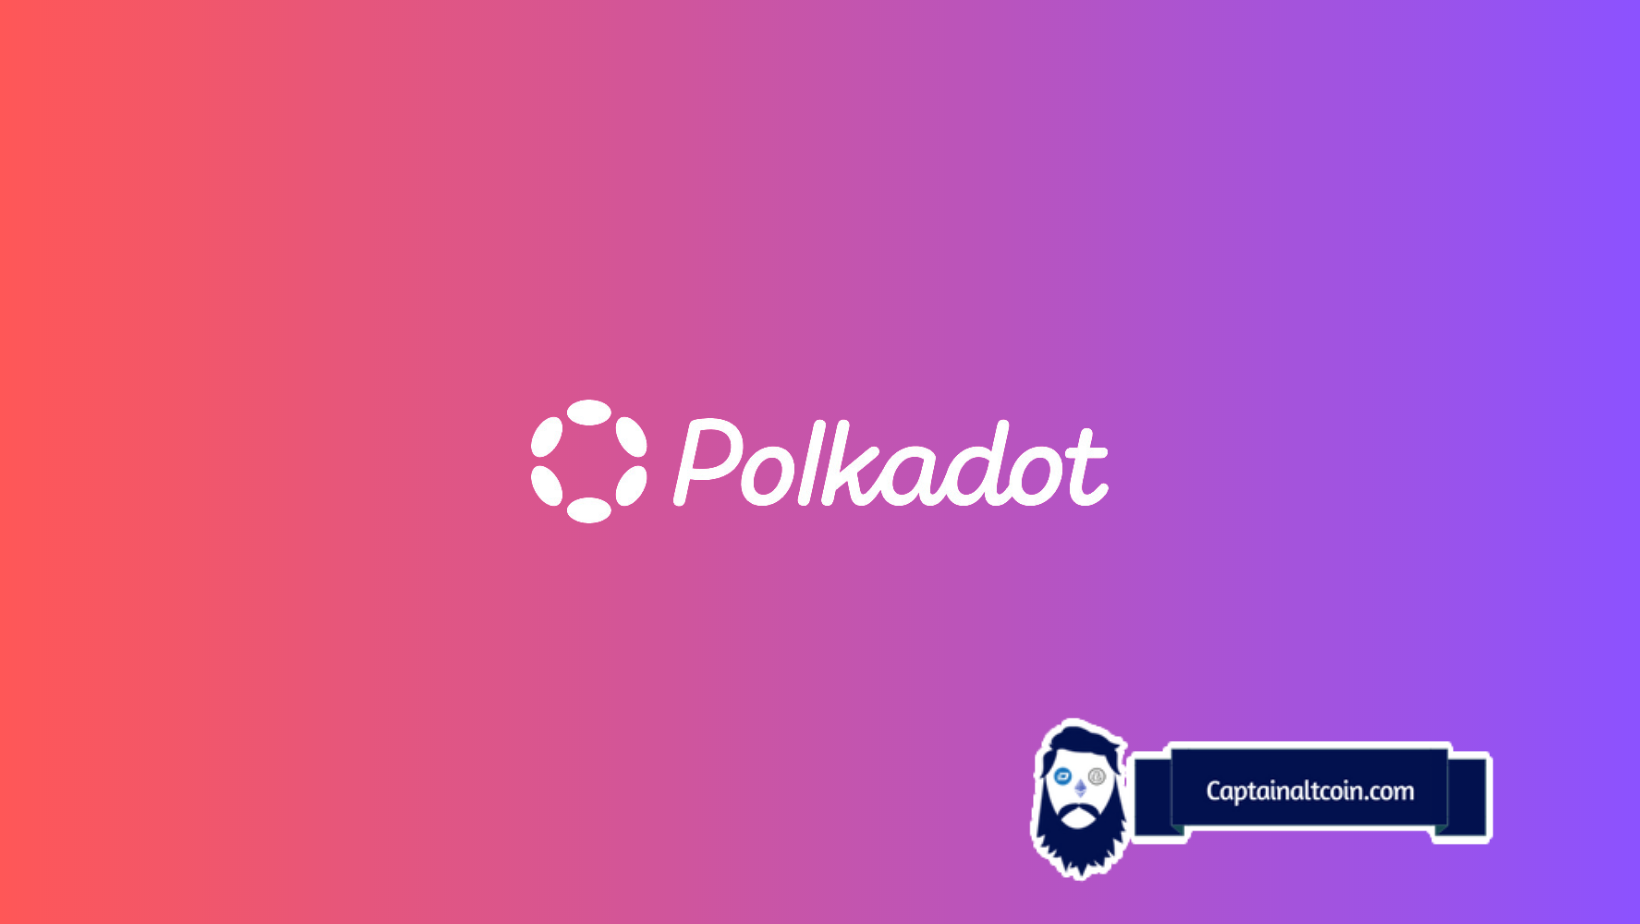 Polkadot (DOT) Price Target is ‘Likely’ $18 Amid Polkadot 2.0 Release and These Catalysts